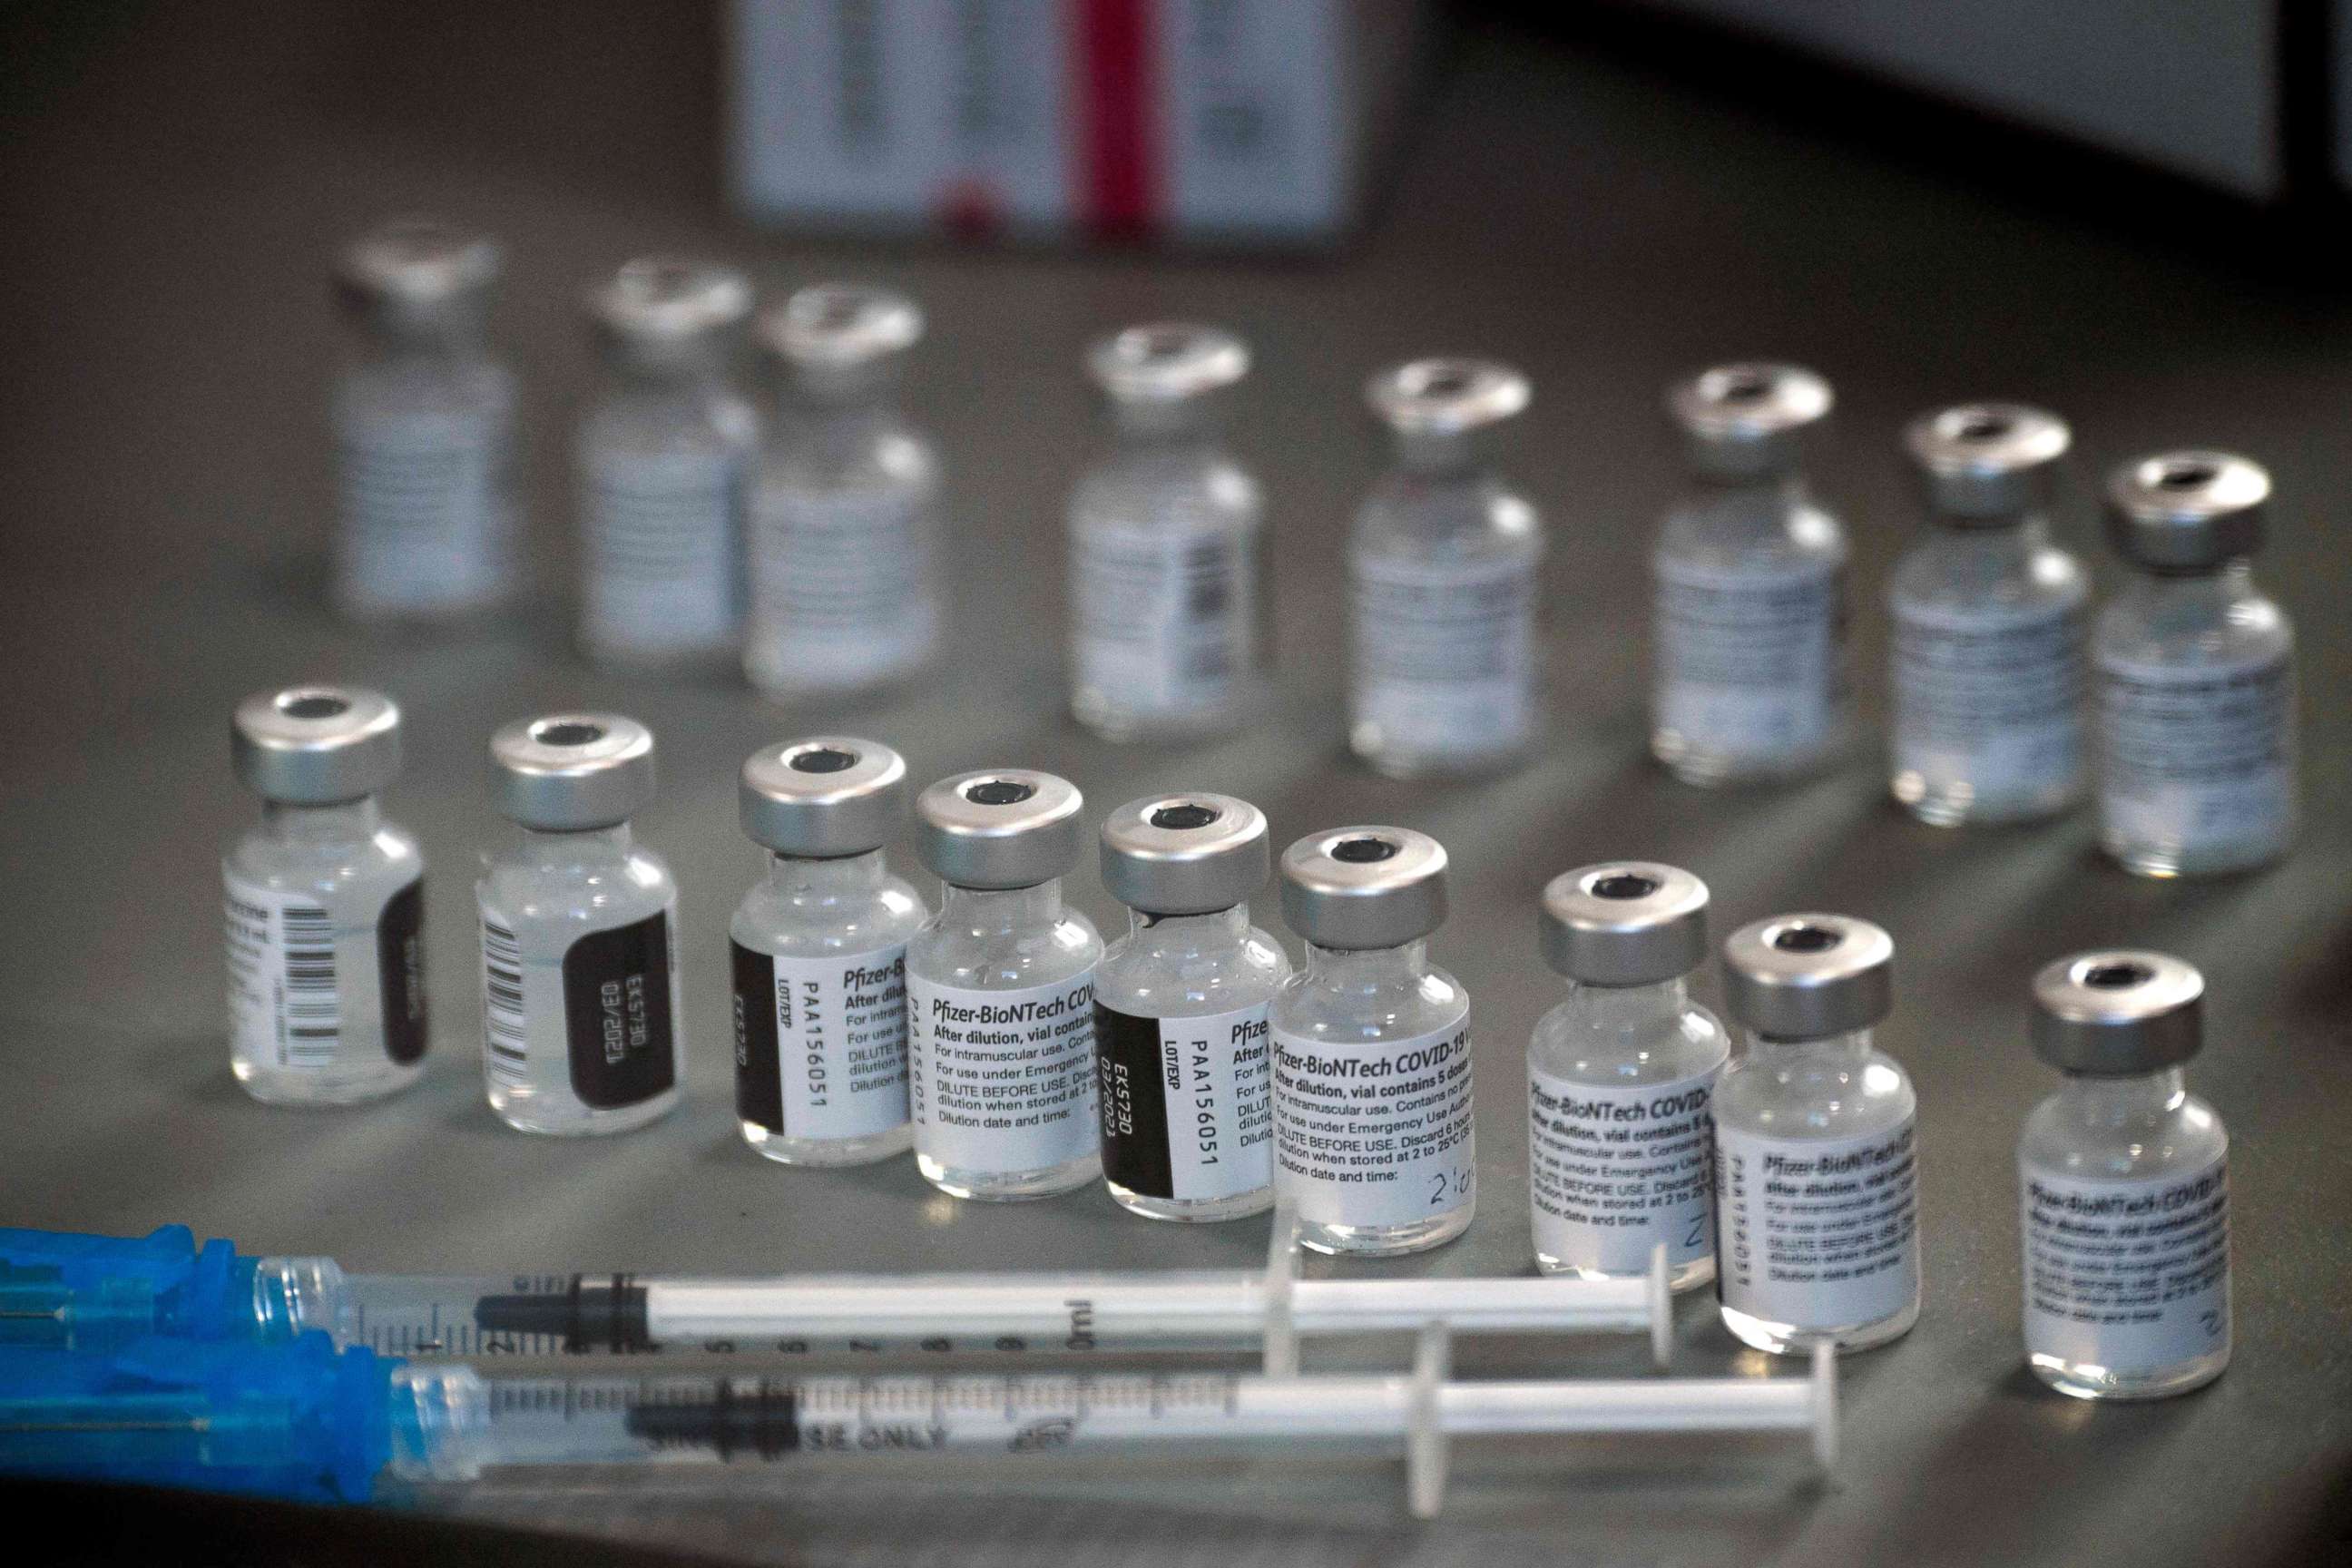 PHOTO: Syringes and vials of the Pfizer-BioNTech Covid-19 vaccine are prepared to be administered in Reno, Nevada, on Dec. 17, 2020.